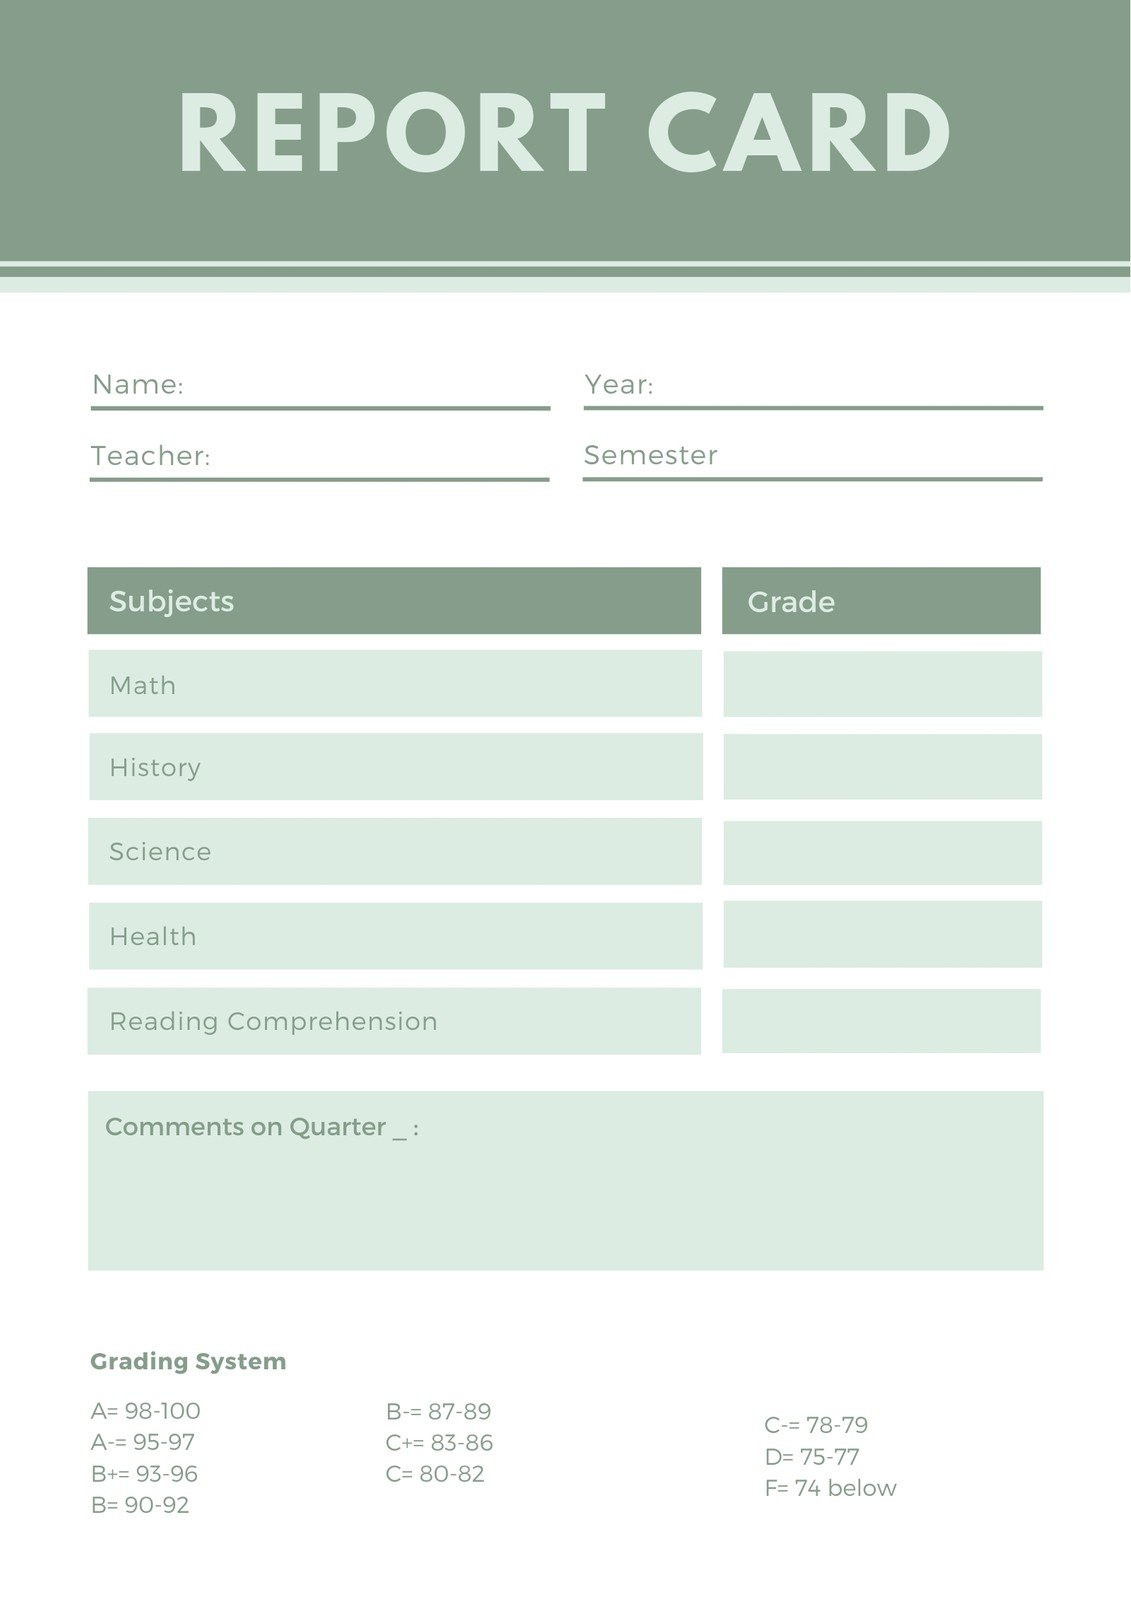 Free, Printable, Customizable Report Card Templates | Canva with Free Printable Grade Cards